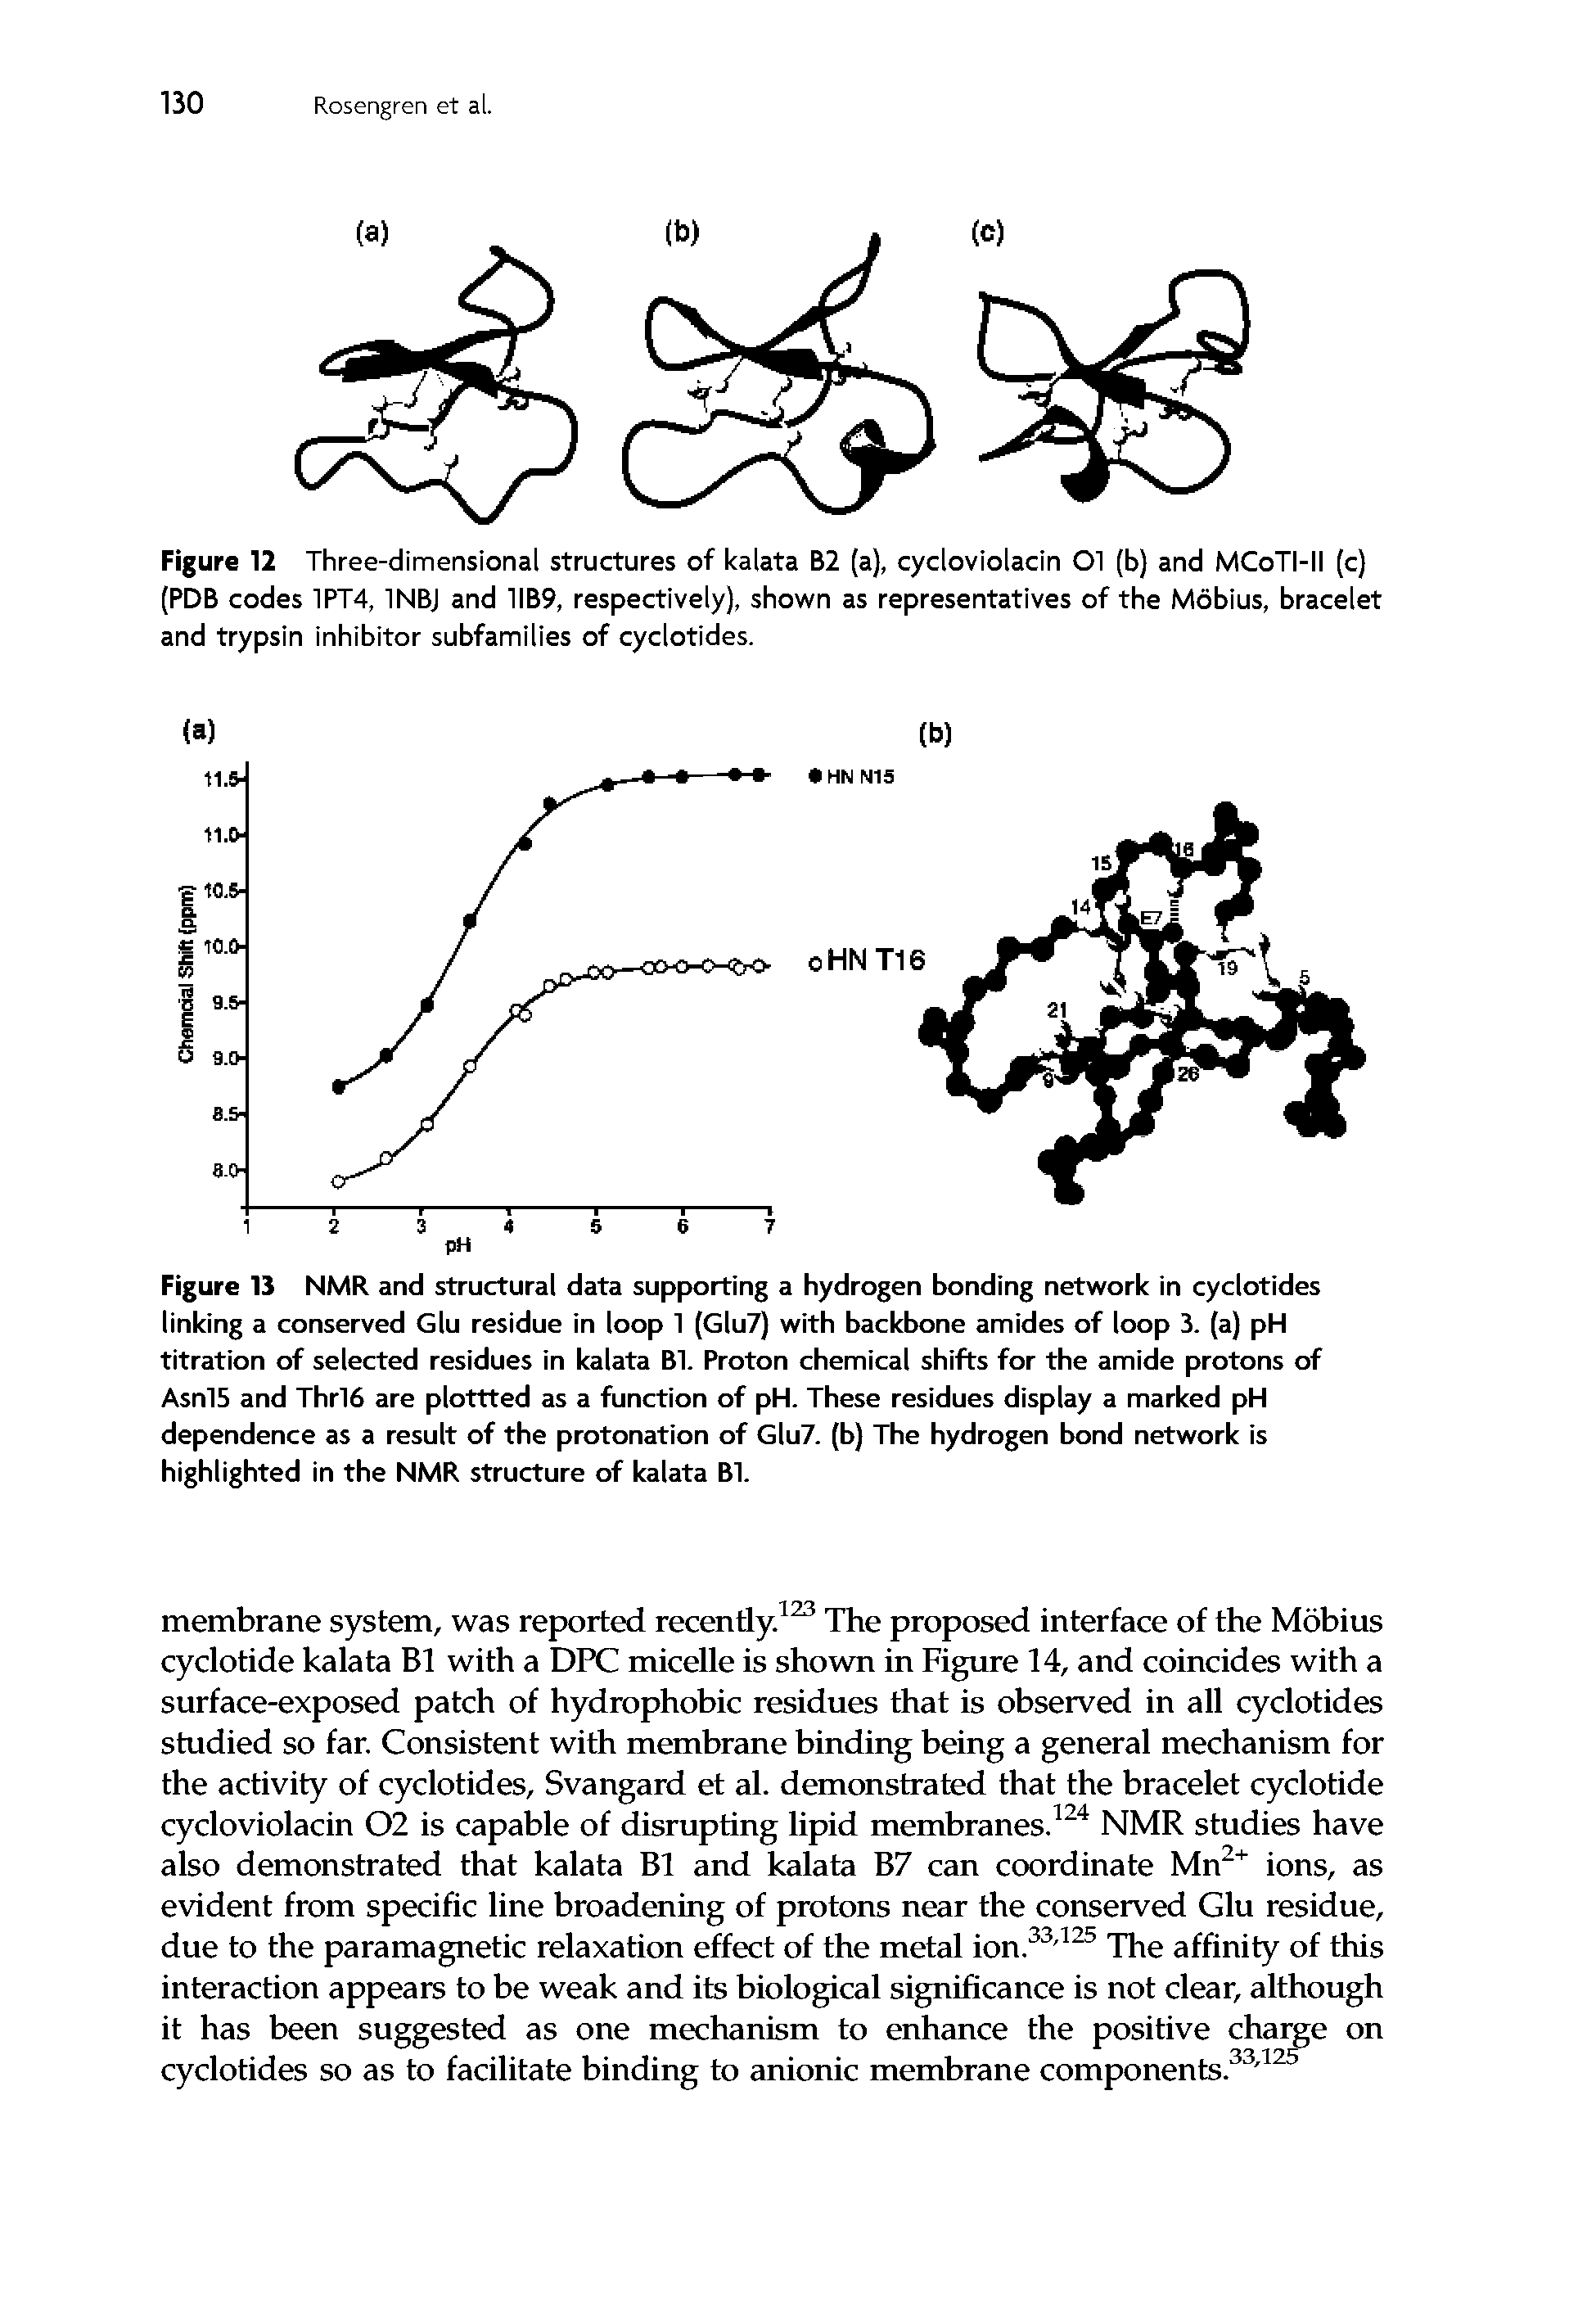 Figure 13 NMR and structural data supporting a hydrogen bonding network in cyclotides linking a conserved Glu residue in loop 1 (Glu7) with backbone amides of loop 3. (a) pH titration of selected residues in kalata Bl. Proton chemical shifts for the amide protons of Asnl5 and Thrl6 are plottted as a function of pH. These residues display a marked pH dependence as a result of the protonation of Glu7. (b) The hydrogen bond network is highlighted in the NMR structure of kalata Bl.